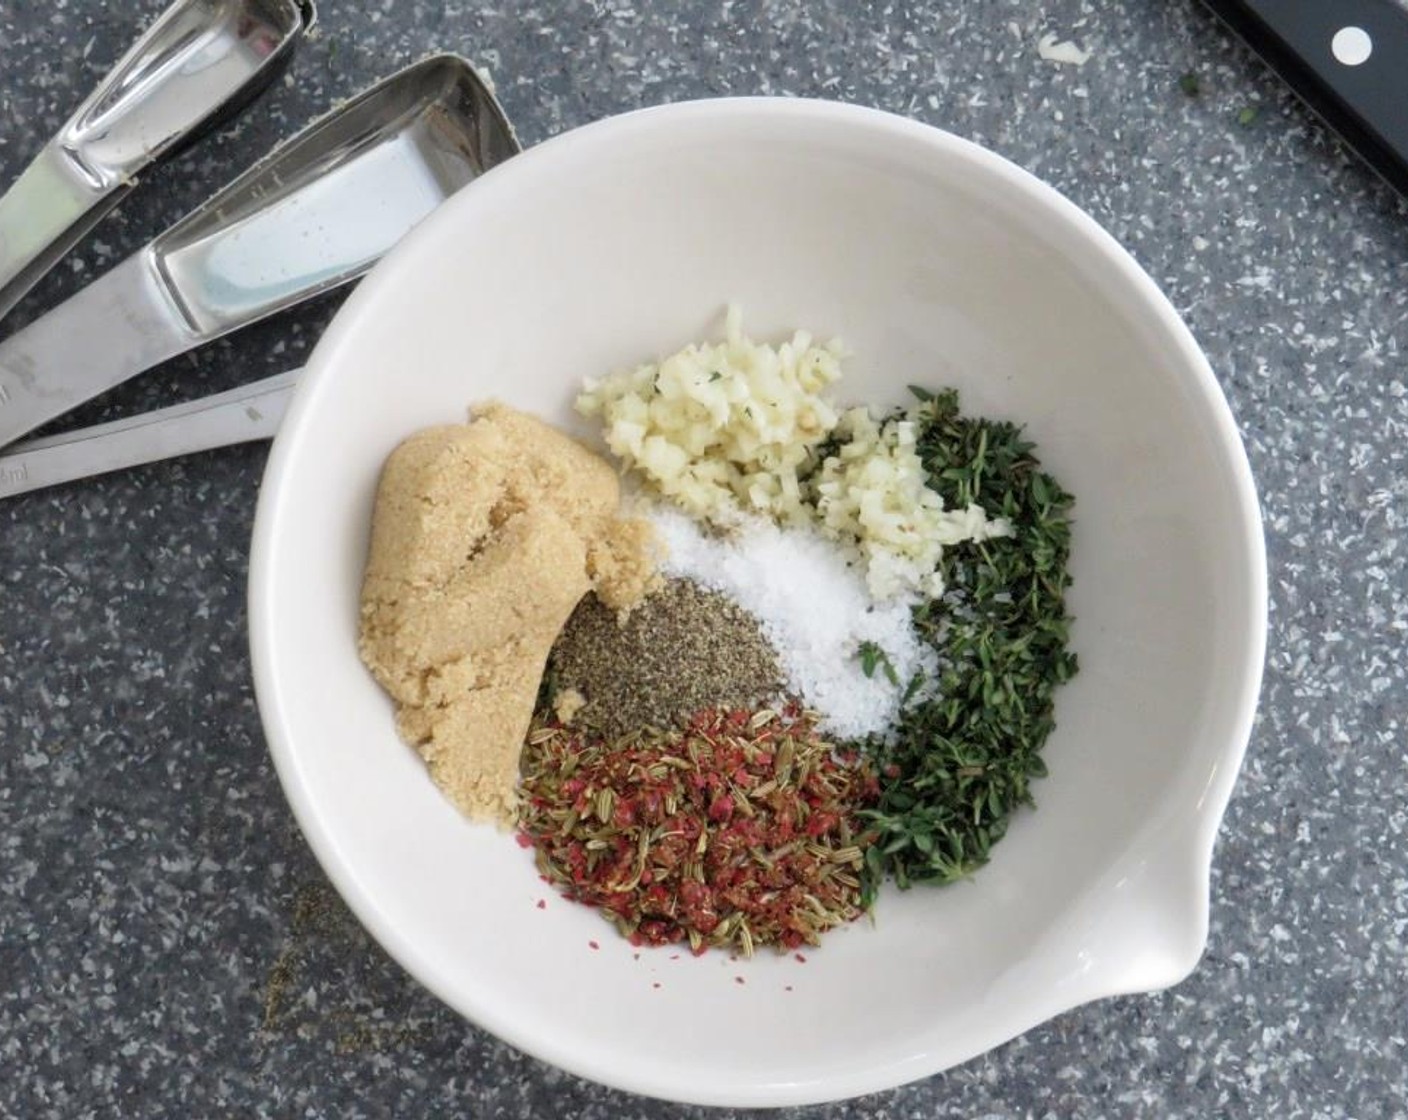 step 2 In a small bowl combine herb rub ingredients: Freshly Ground Black Pepper (1 tsp), Kosher Salt (1 tsp), Brown Sugar (1 1/2 Tbsp), chopped rosemary and thyme, crushed red peppercorns and fennel seeds, and minced garlic.